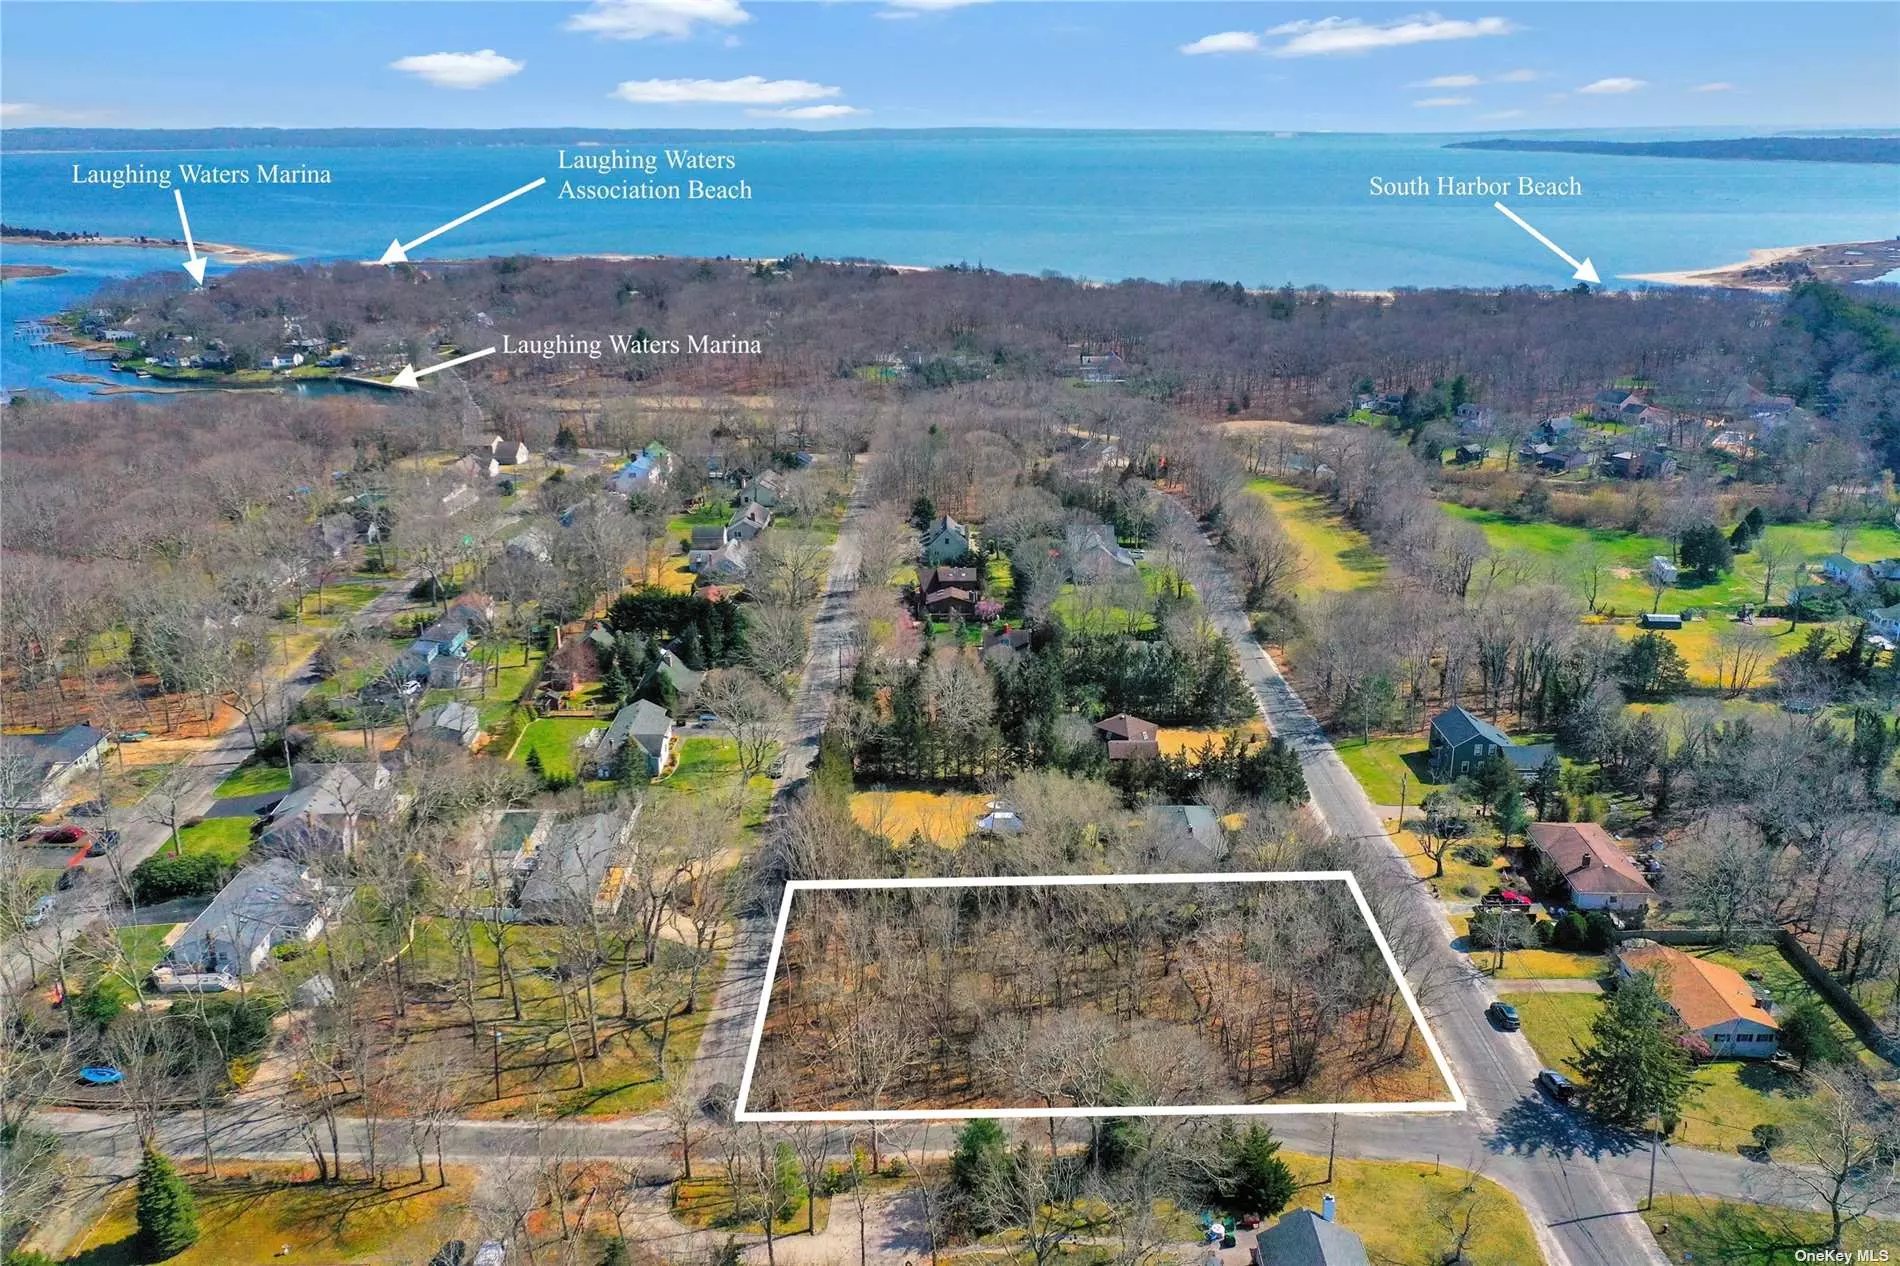 Southold - Laughing Waters - Beautiful corner .6 acre parcel with Southern and Western exposures. A rare opportunity to build your dream home in this sought-after, well established community of Laughing Waters. Enjoy all the amenities that come with Lauging Waters property ownership while you own this vacant parcel, and while you plan and build your home. The Association deeded sandy bay beach, 2 marinas and boat ramps are part of this package and South Harbor Beach and Croteau Vineyards are just a stroll away. Close to restaurants, farm stands, wineries, breweries and all North Fork activities. Your quintessential North Fork beach house or year-round residence awaits. Yes, location still matters.